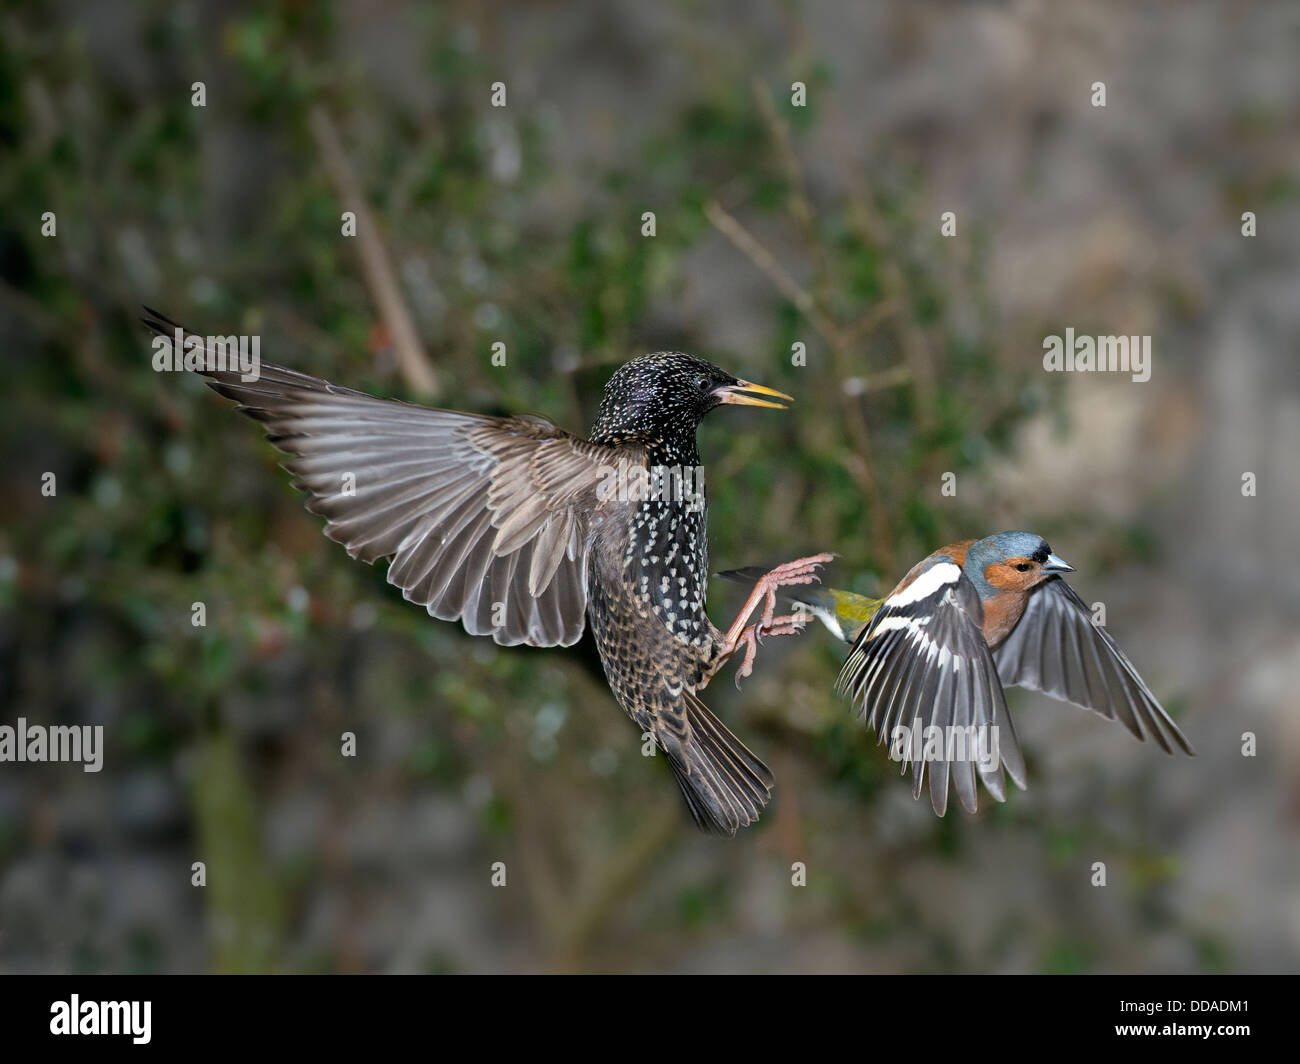 A starling chasing a chaffing of a feeder Stock Photo